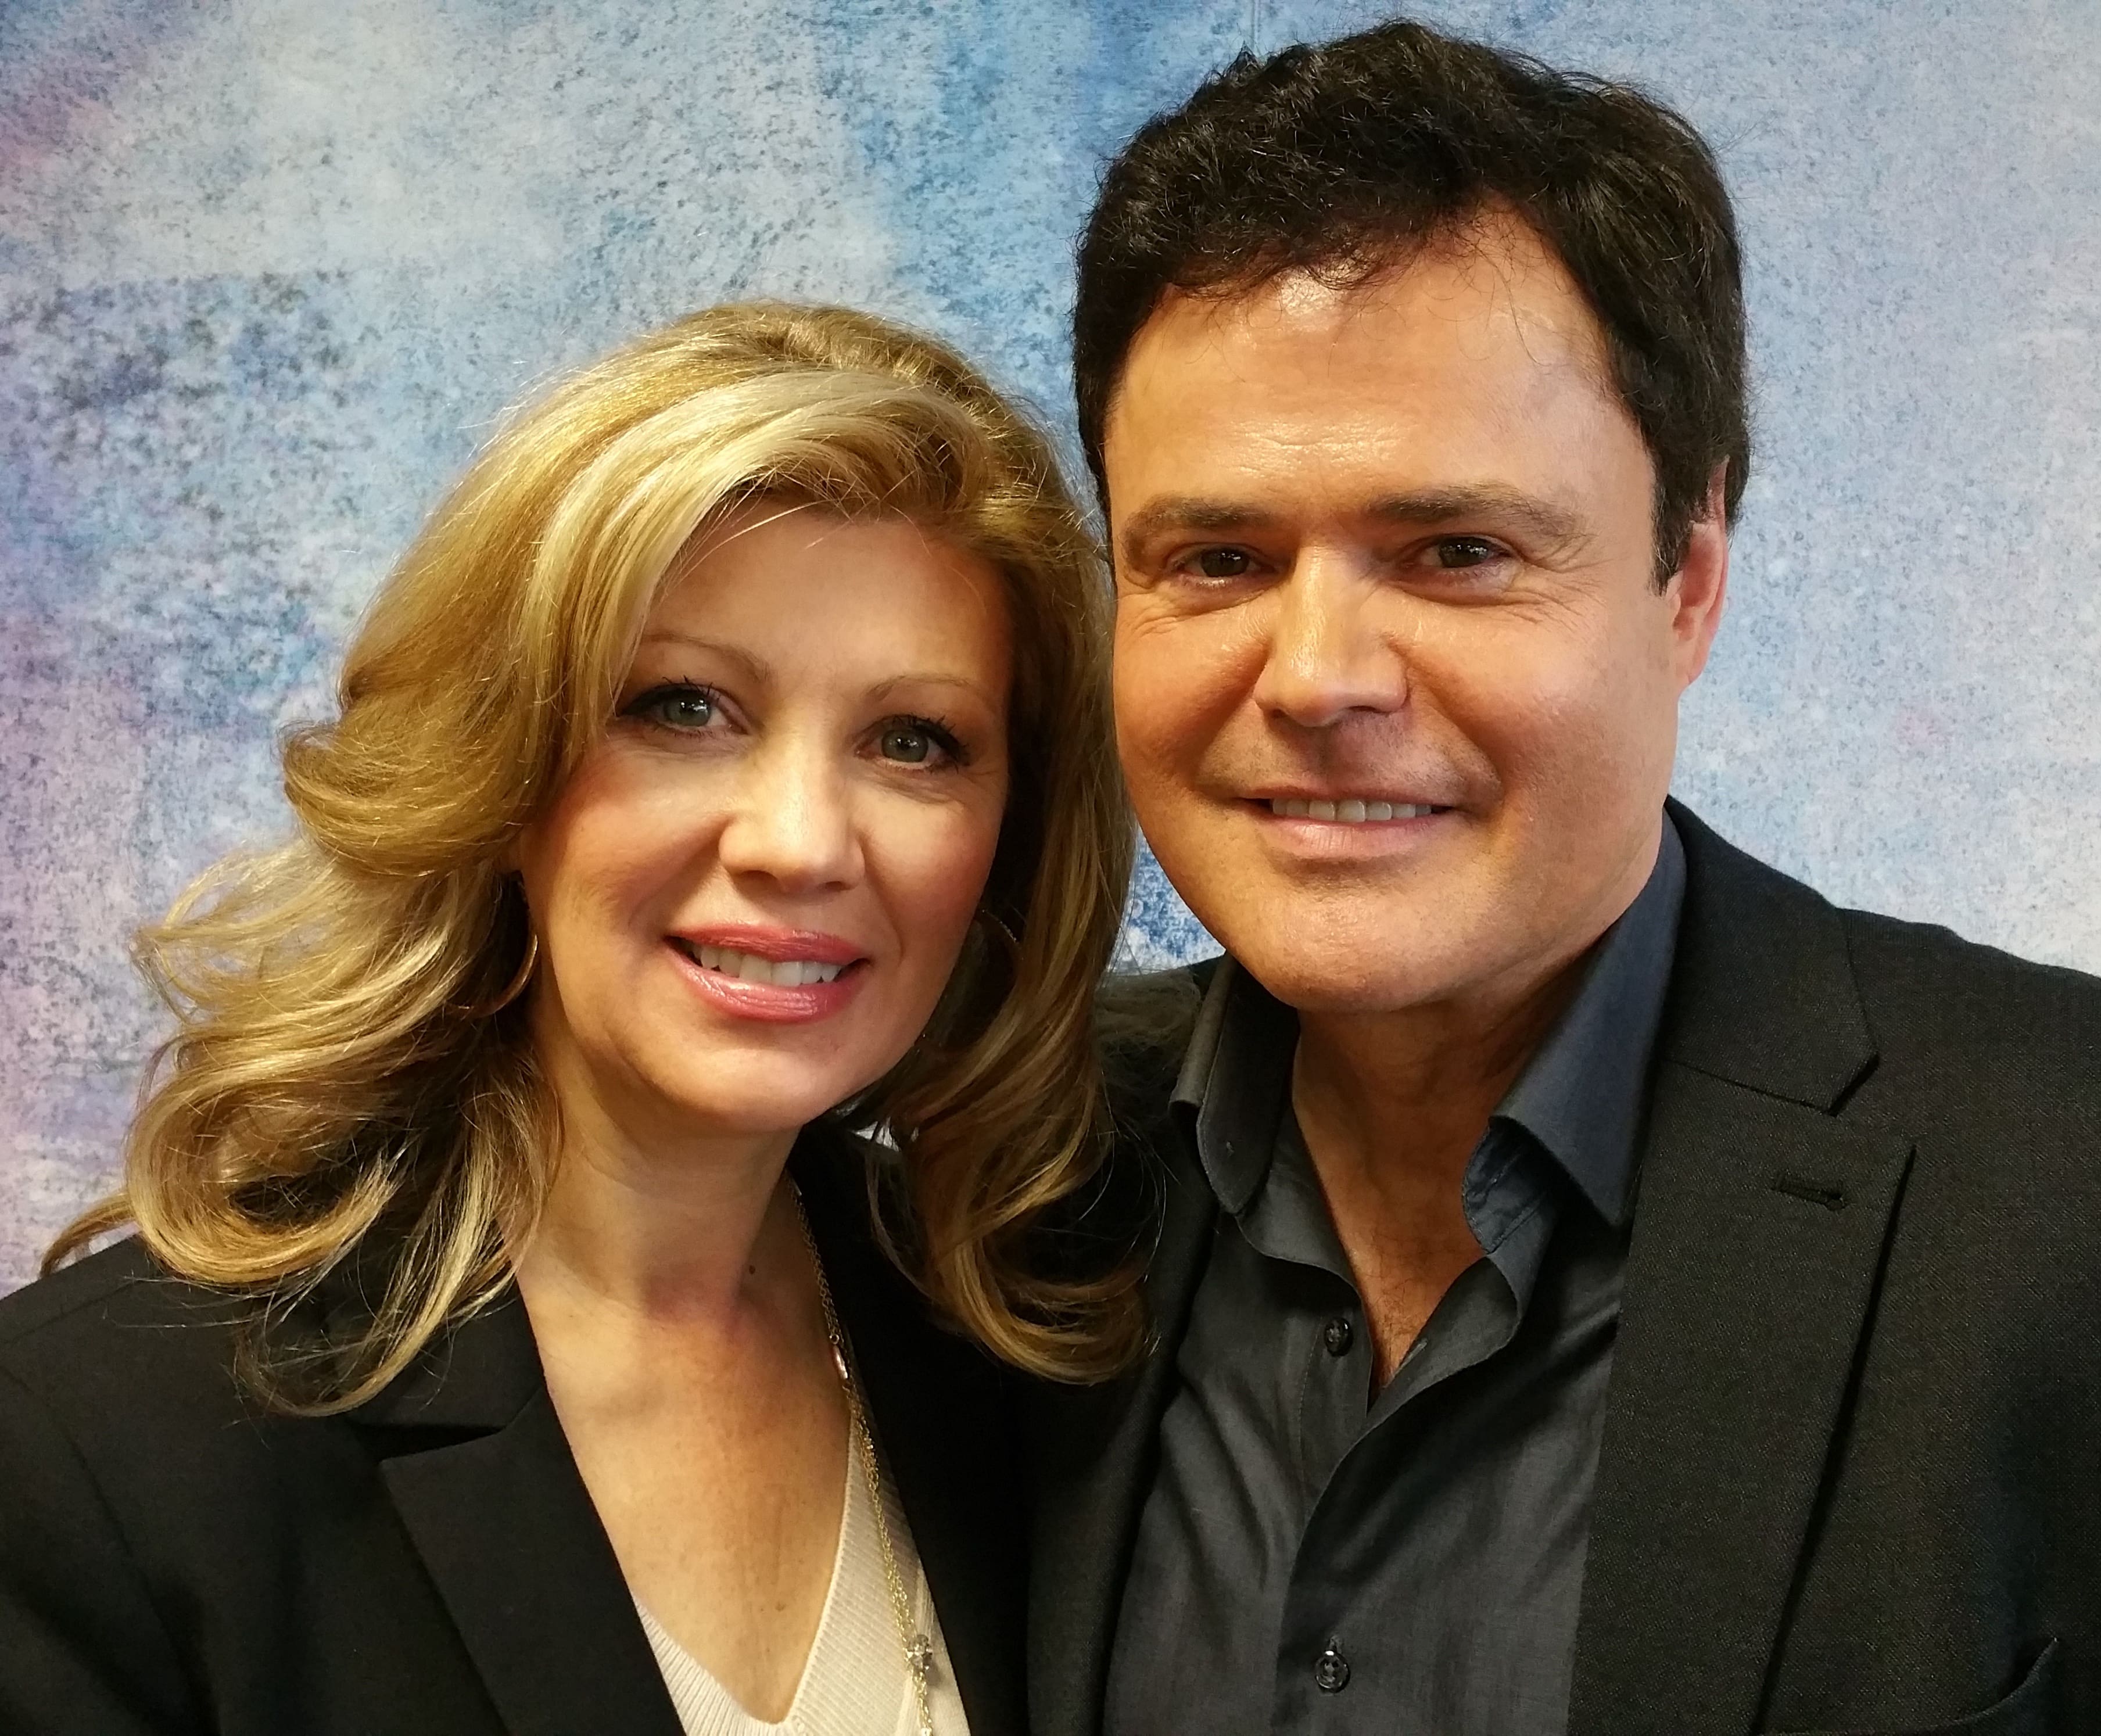 Donny Osmond in a black formal suit with his wife in a white vest and black coat.